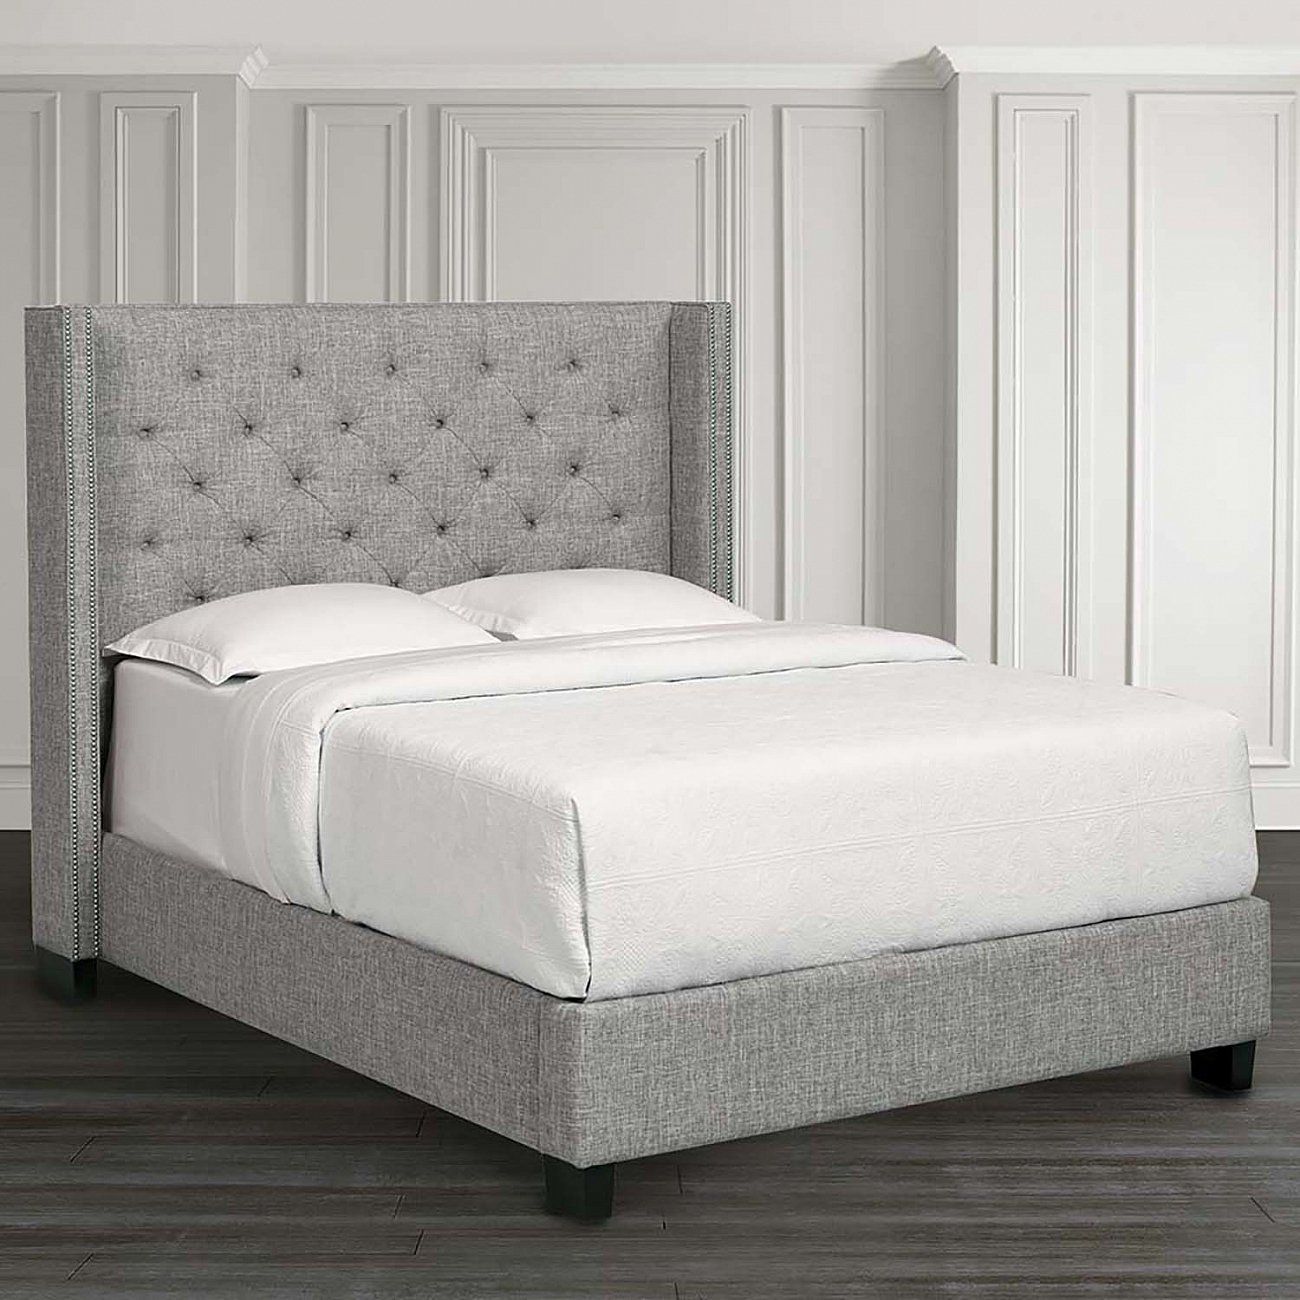 Double bed with upholstered headboard 160x200 cm grey-brown Wing